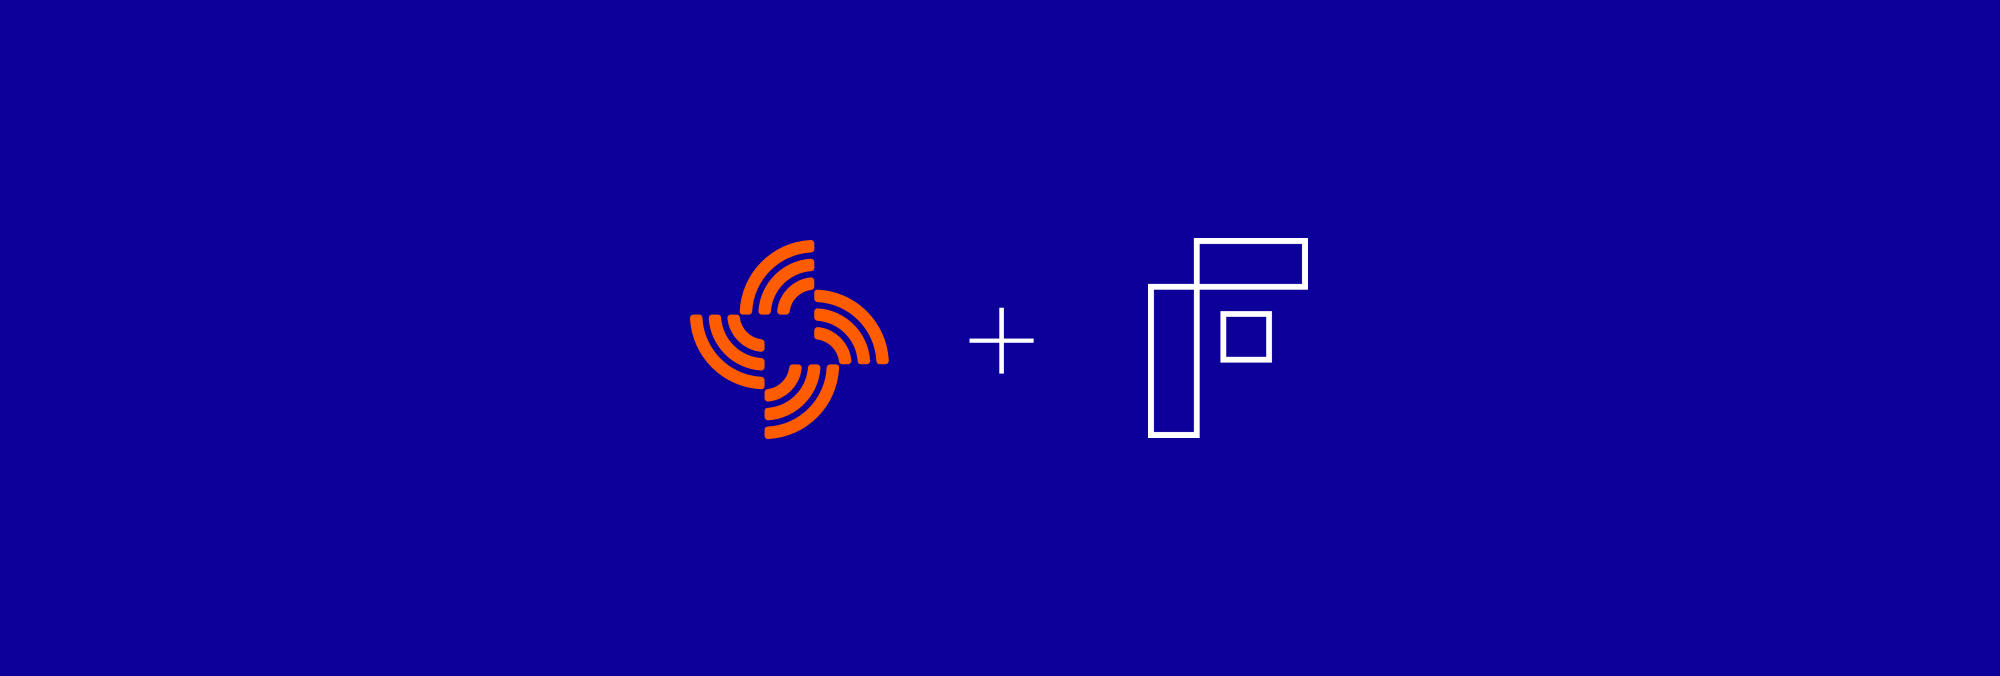 News: Streamr and Fysical to Radically Reshape Road Planning